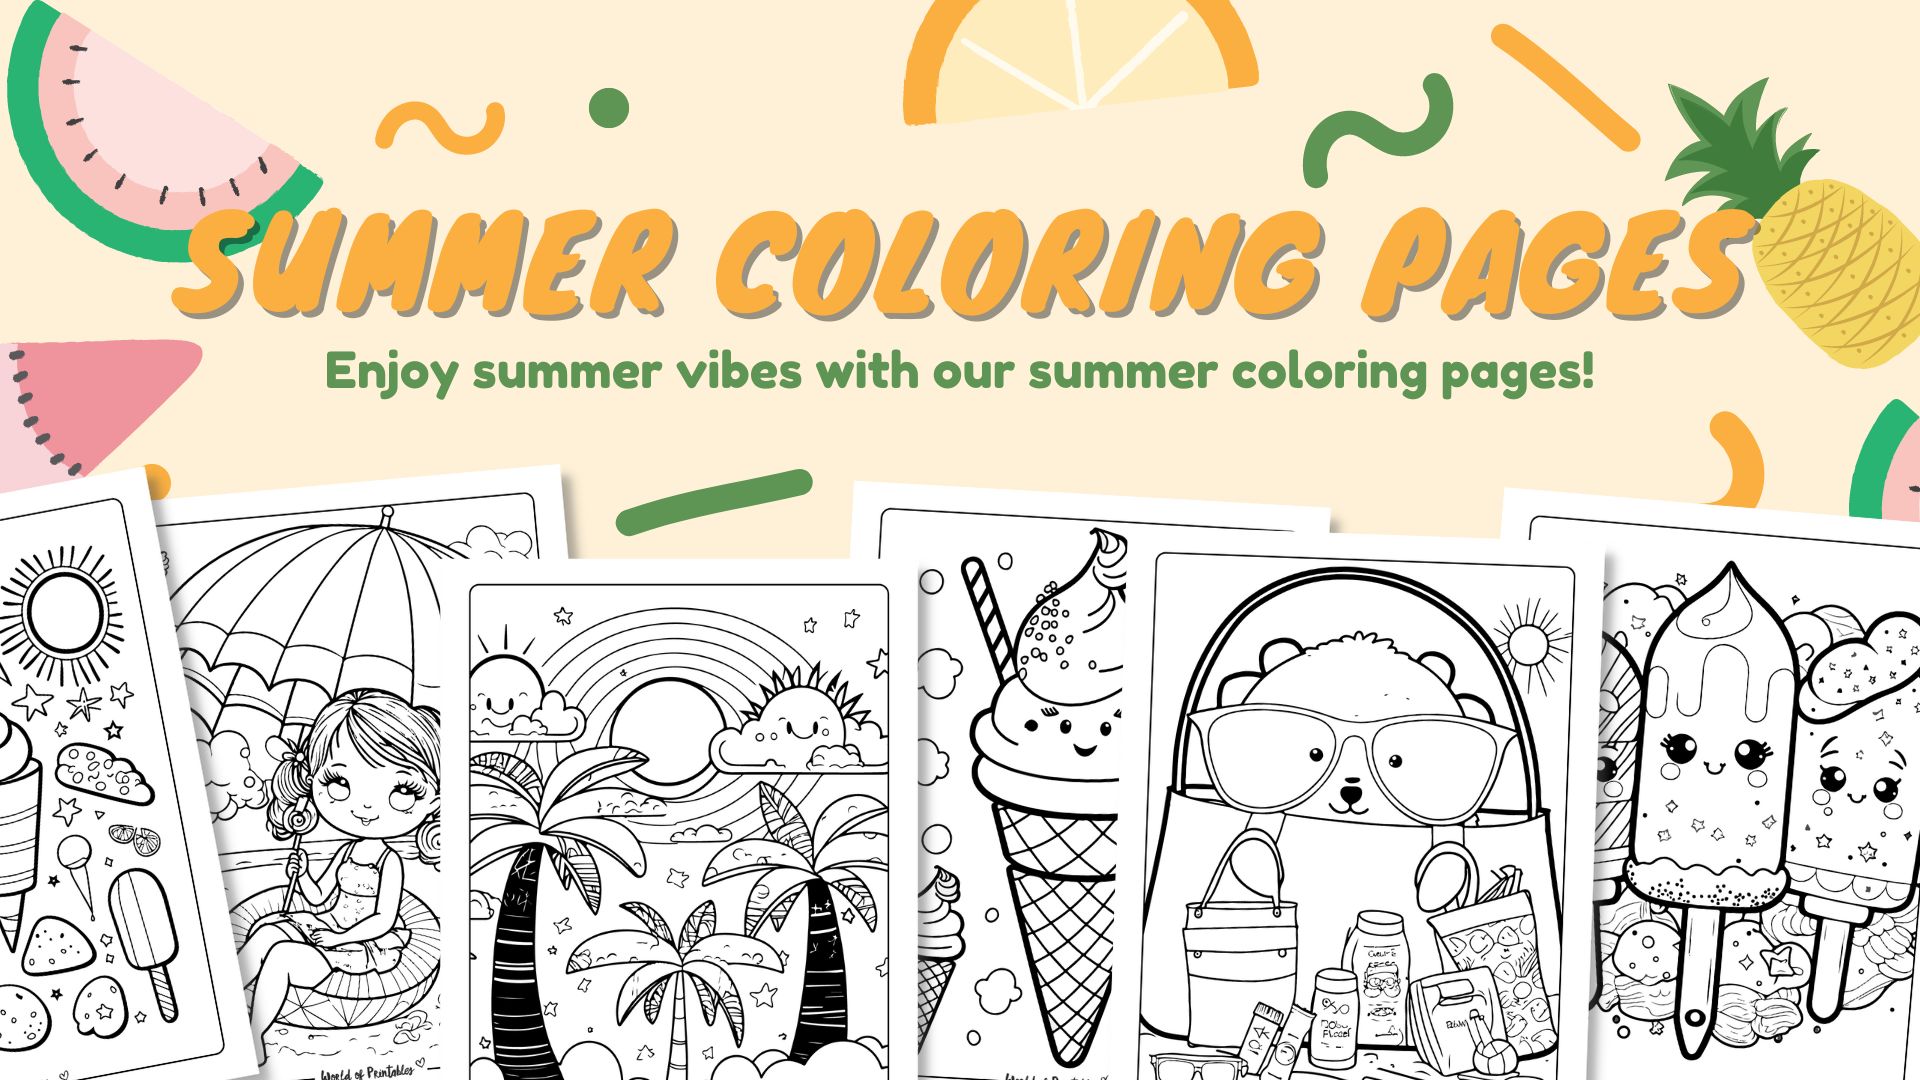 Summer coloring pages for kids adults